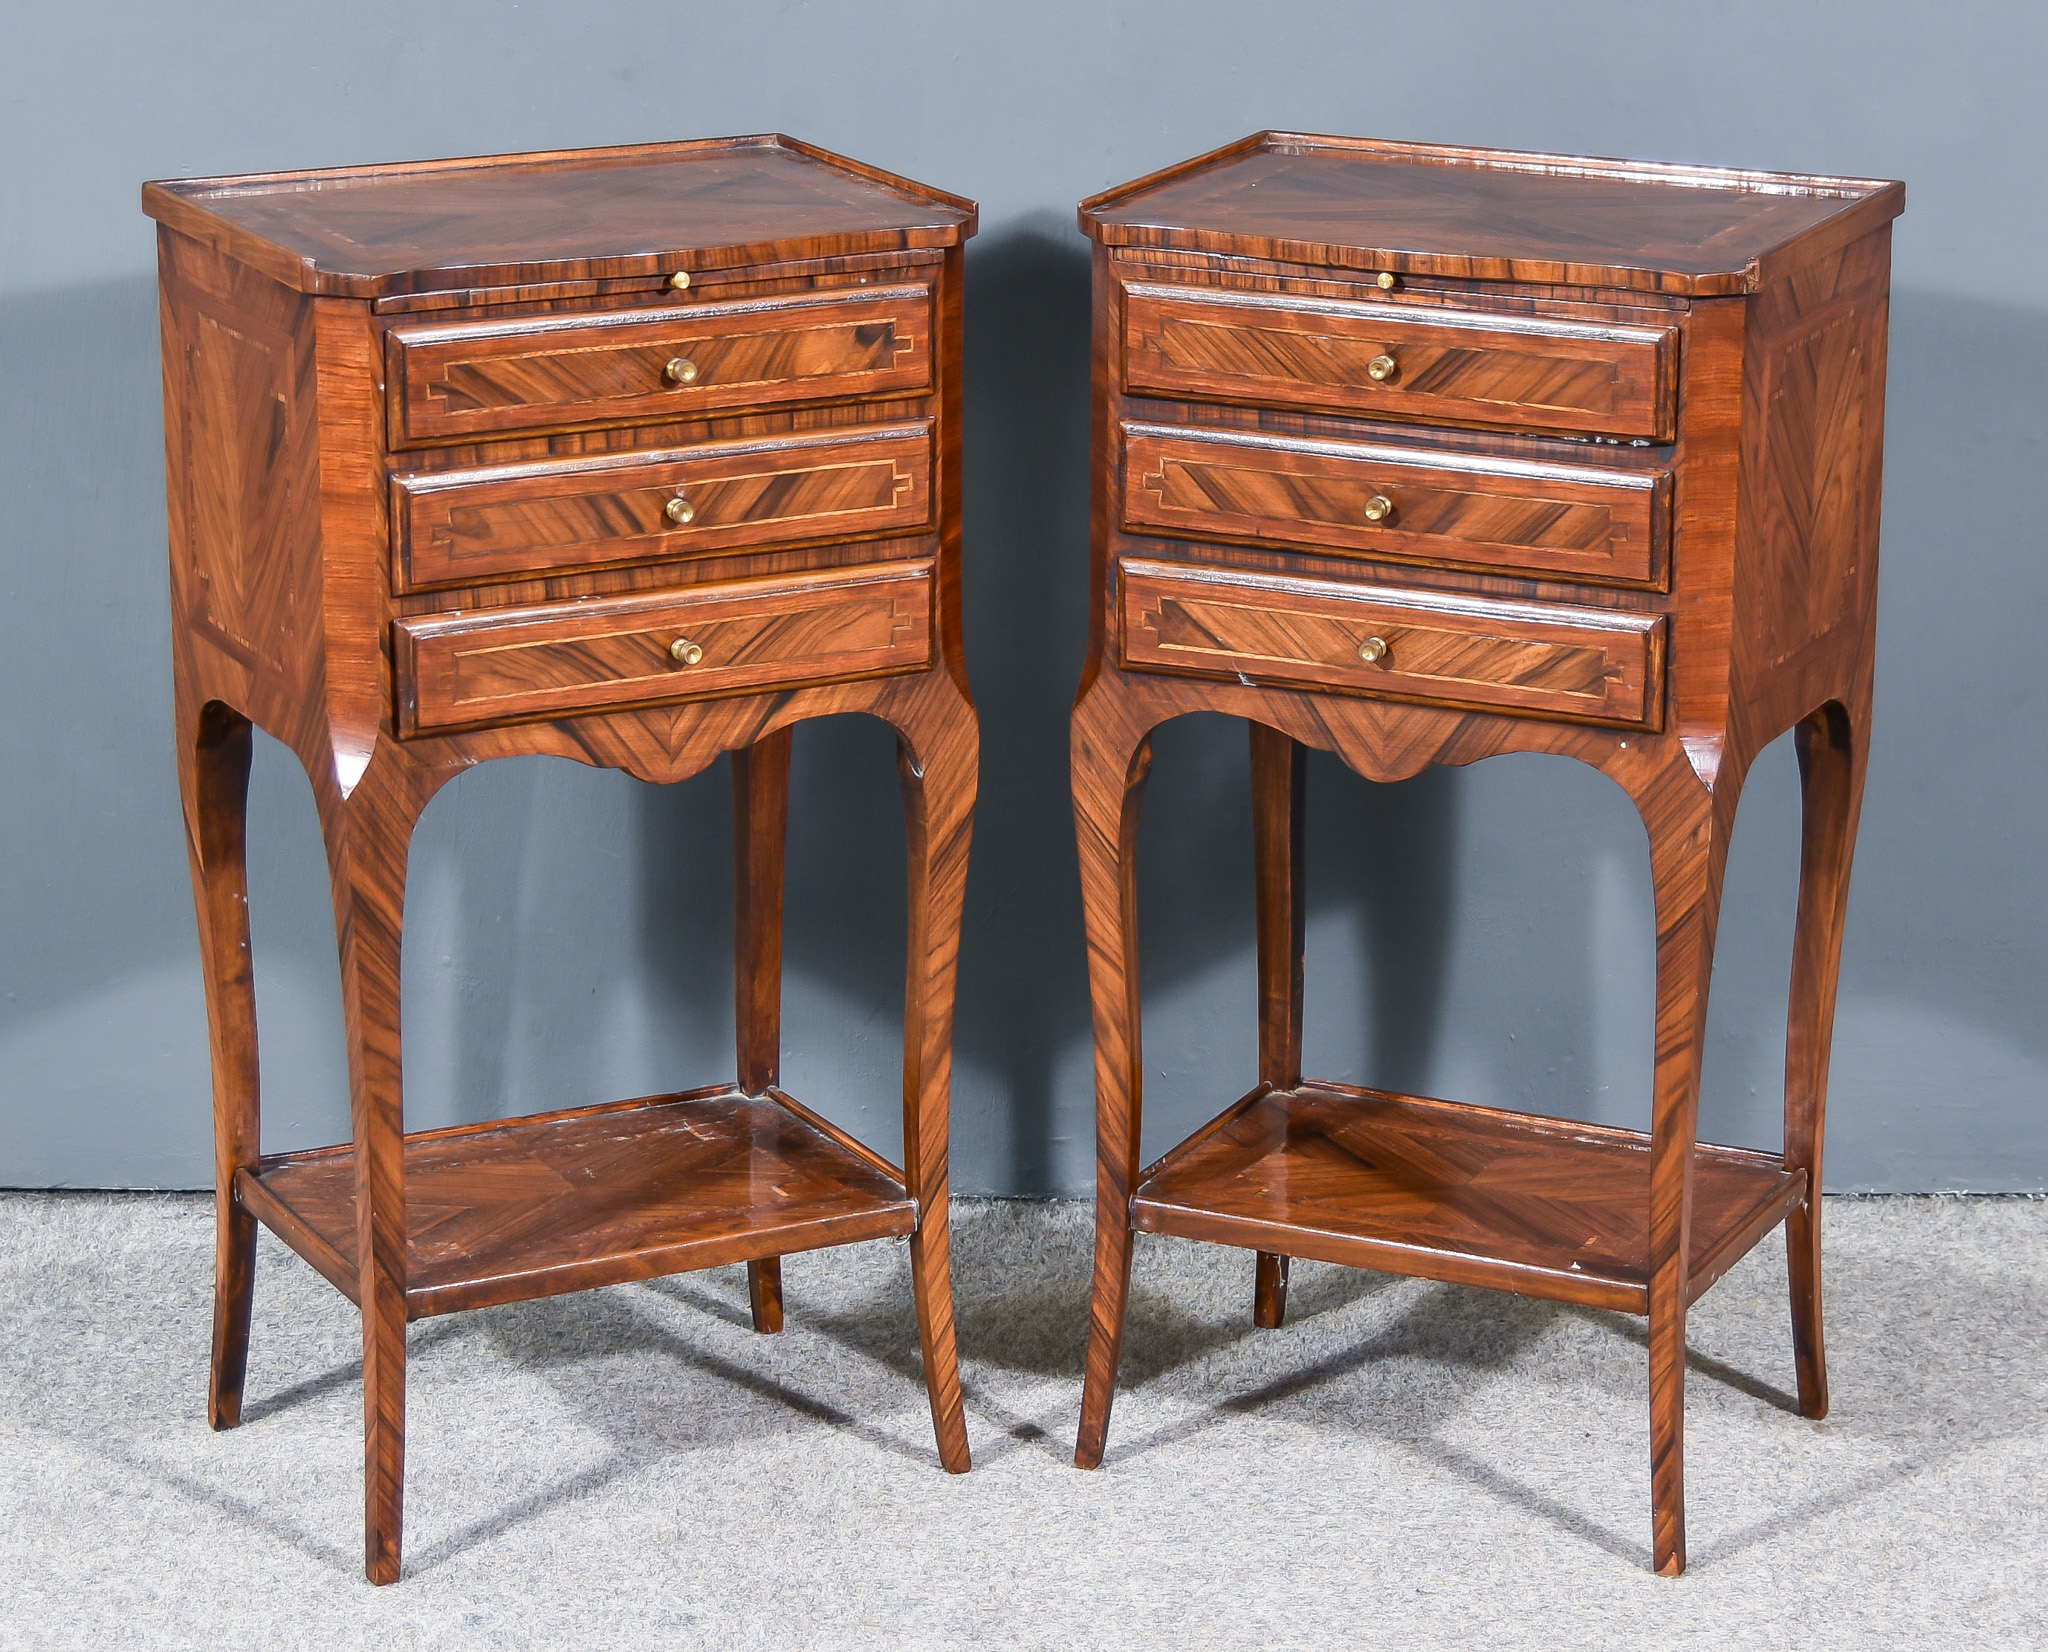 A Pair of 20th Century French Kingwood Tray Top Bedside Chests, inlaid with bandings, fitted slide